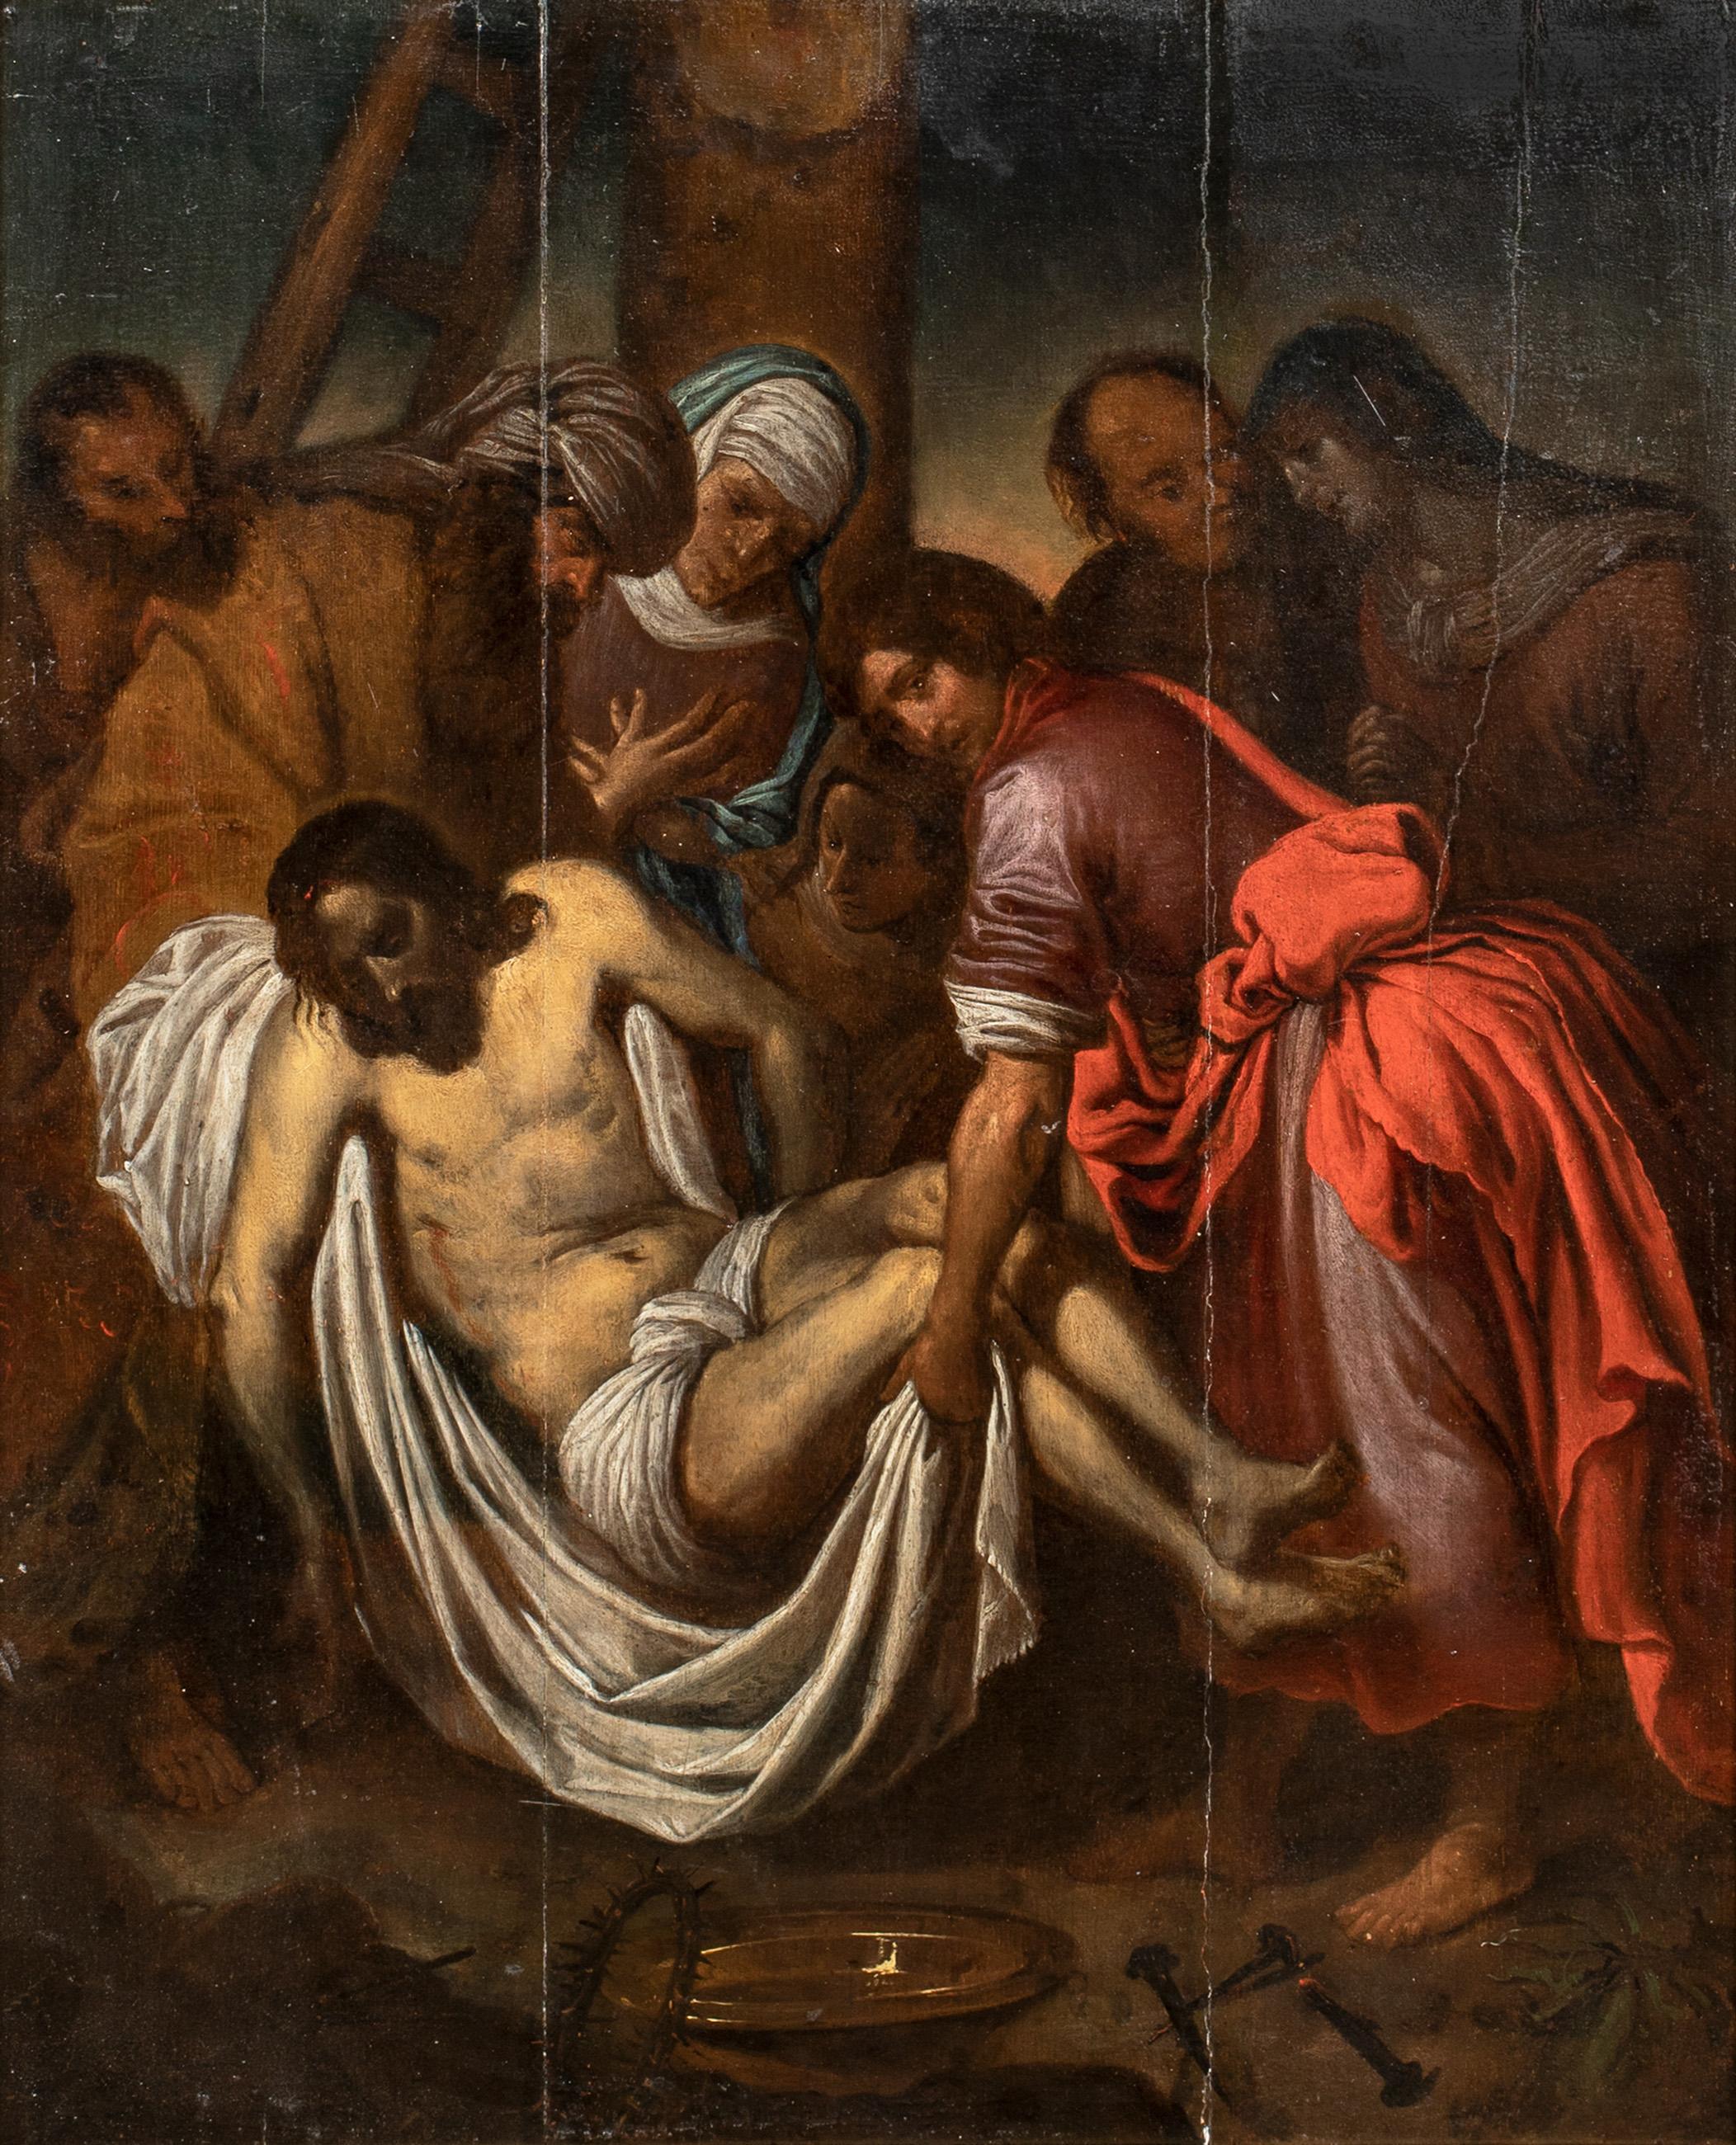 The Descent From The Cross, 17th Century 

Italian School - early oil on panel

Fine large 17th Century Italian School Old Master of the descent from the cross, oil on cradled panel. Excellent quality and condition early Old Master of the body of